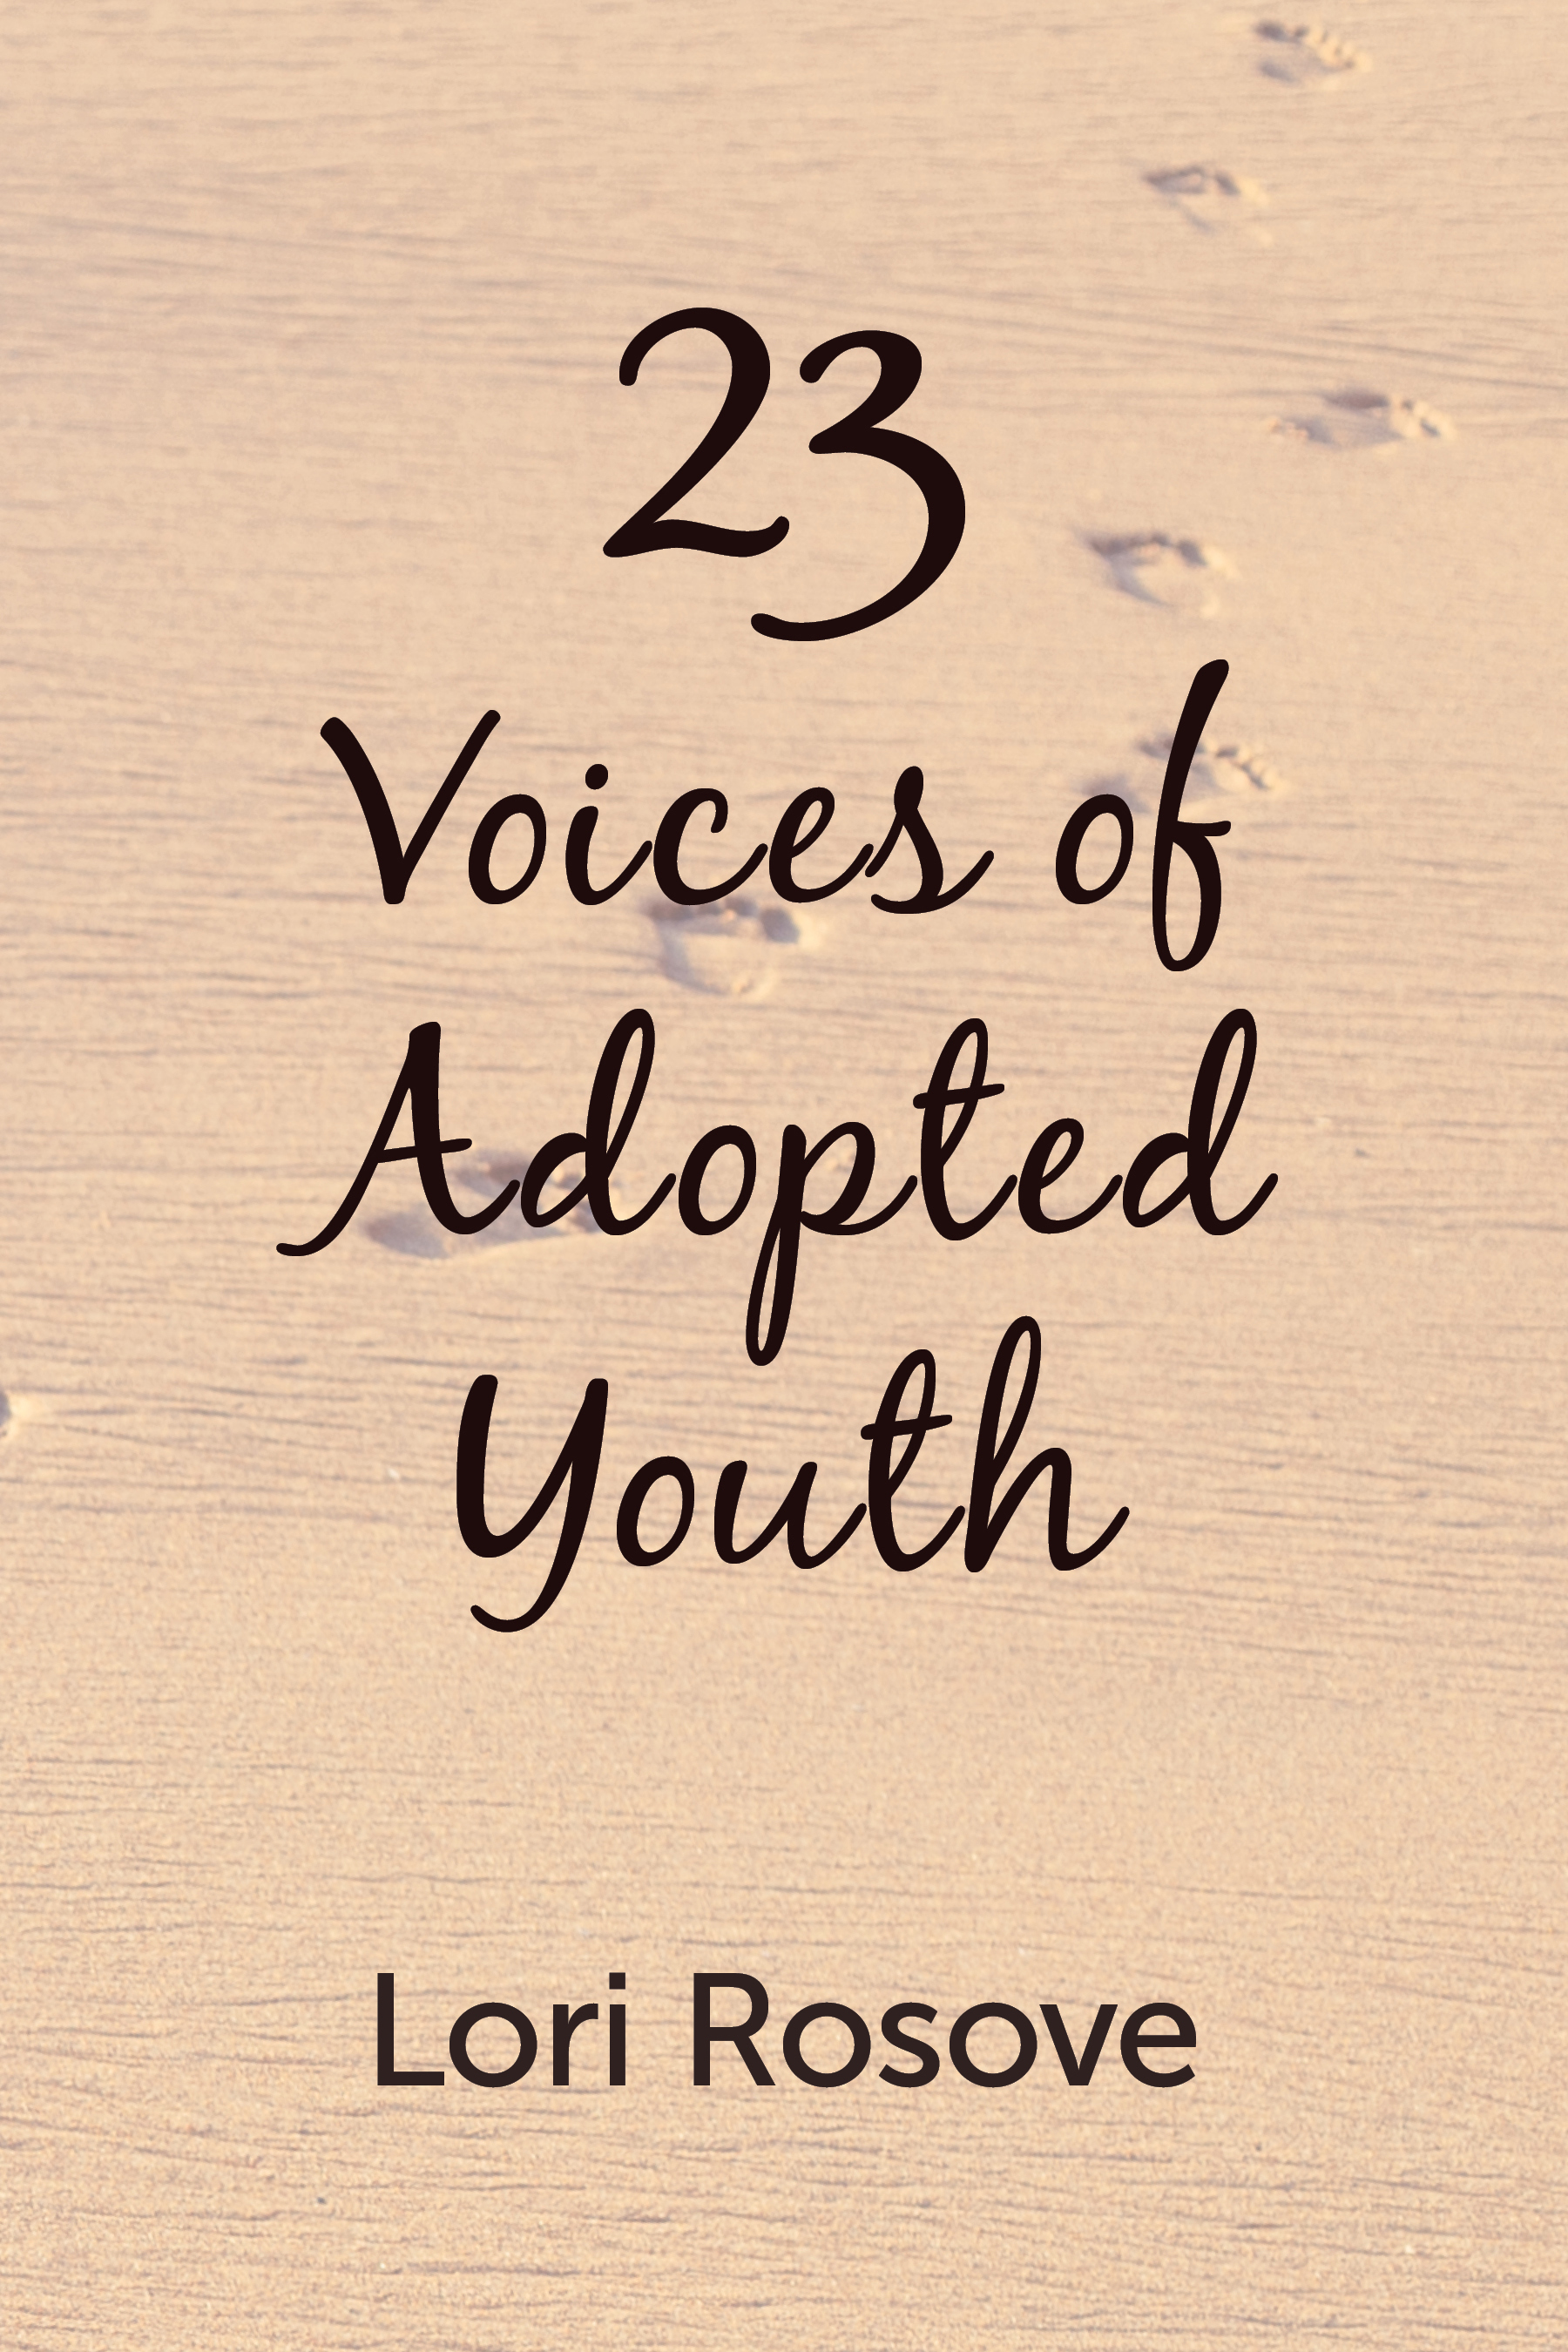 23: Voices of Adopted Youth